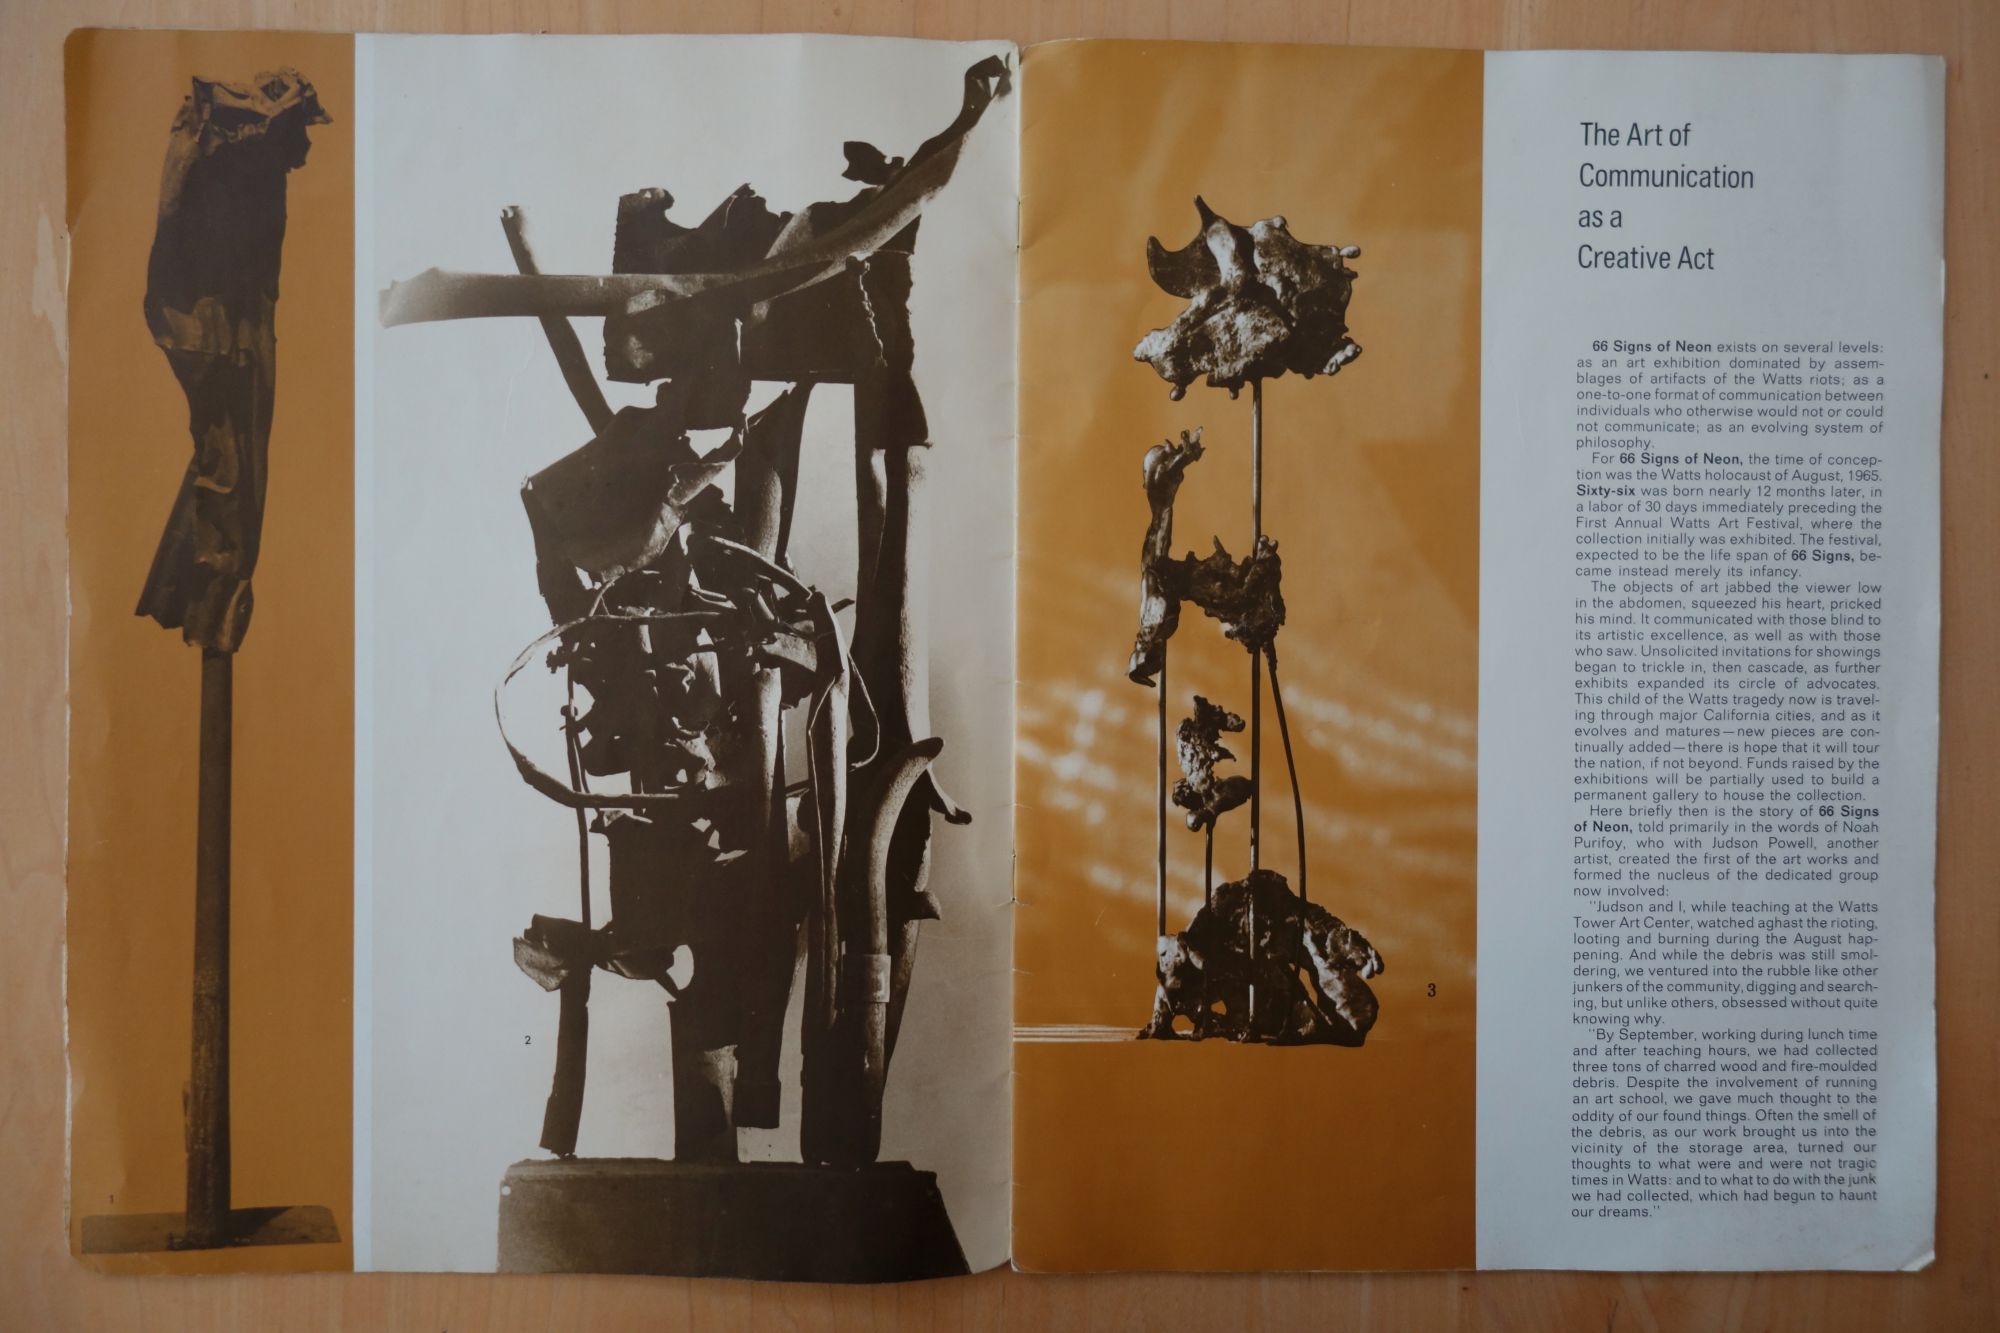 Page from a catalog of the exhibition '66 Signs of Neon', showing 3 assemblage sculptures made from detritus of the Watts riots, and text describing the origins of the exhibit.